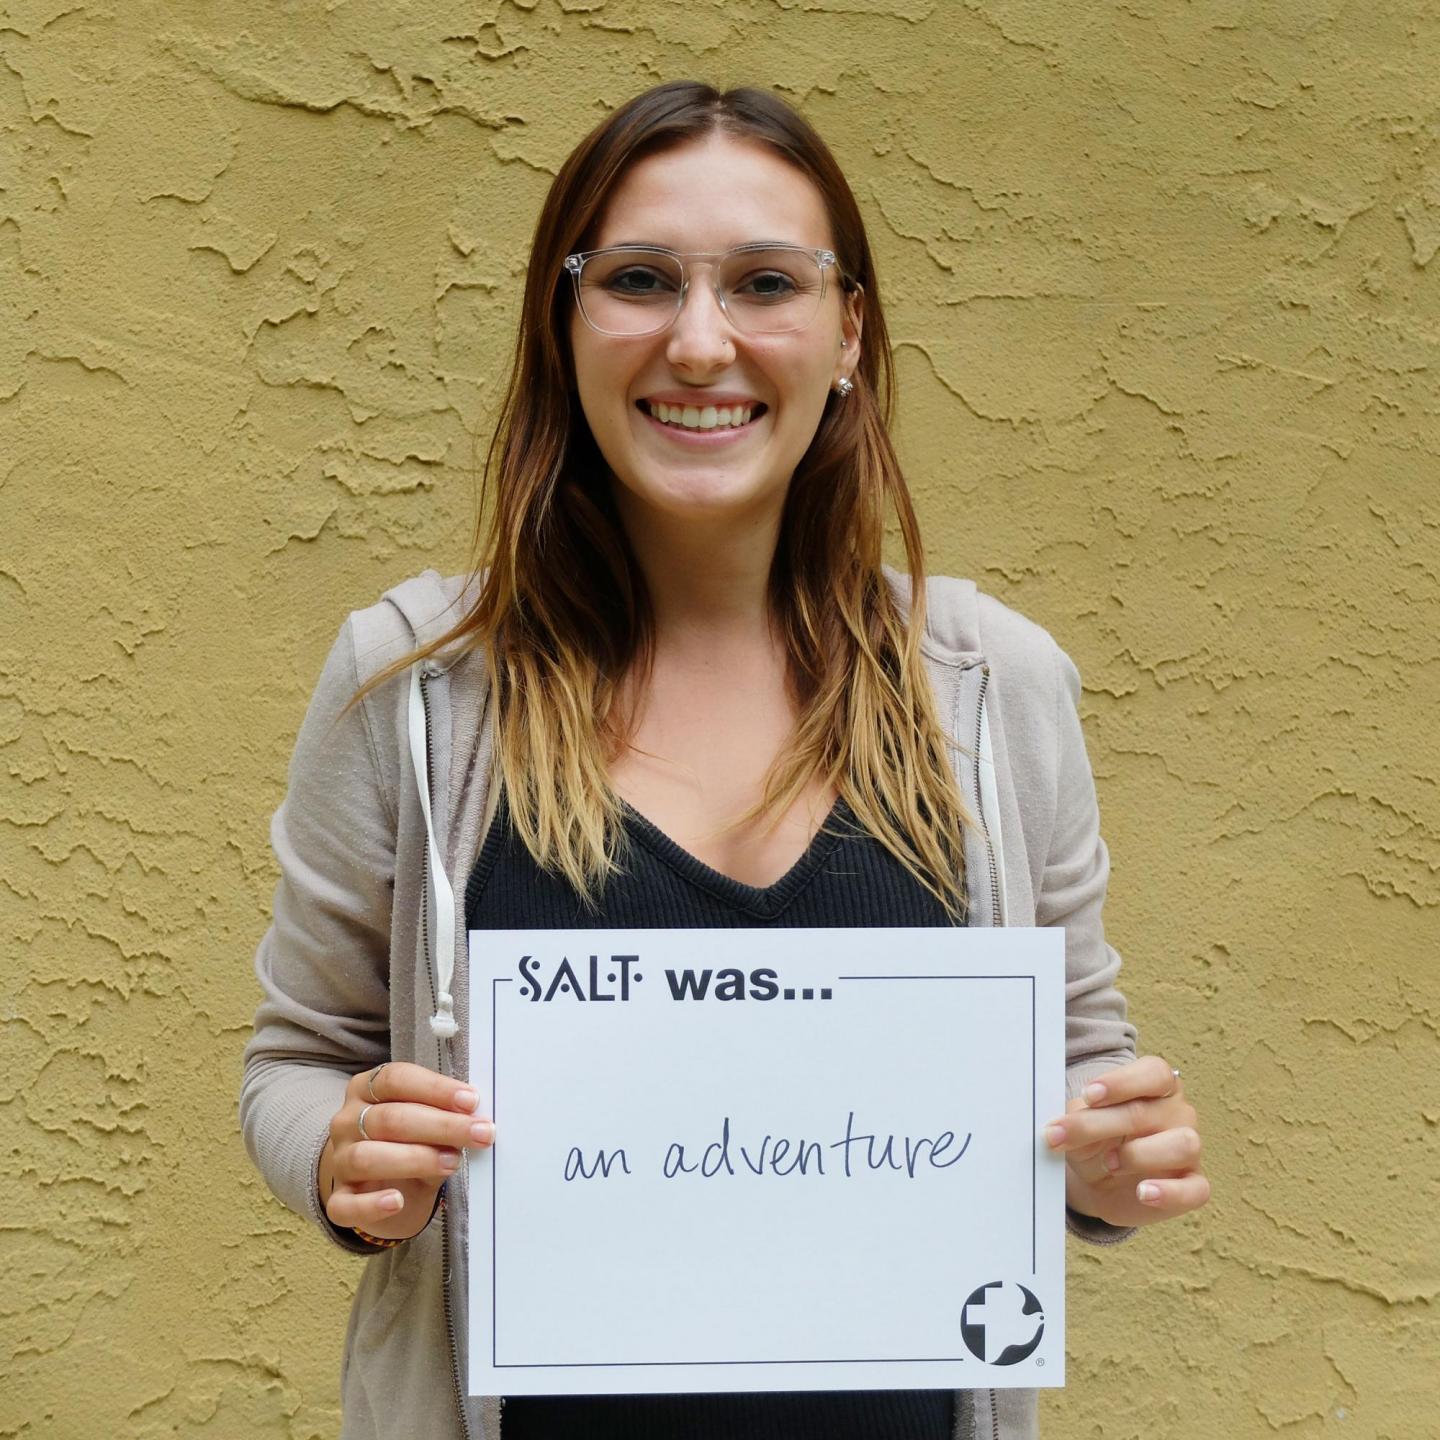 A young adult stands in front of a yellow wall and holds a sign that says, "SALT was an adventure"